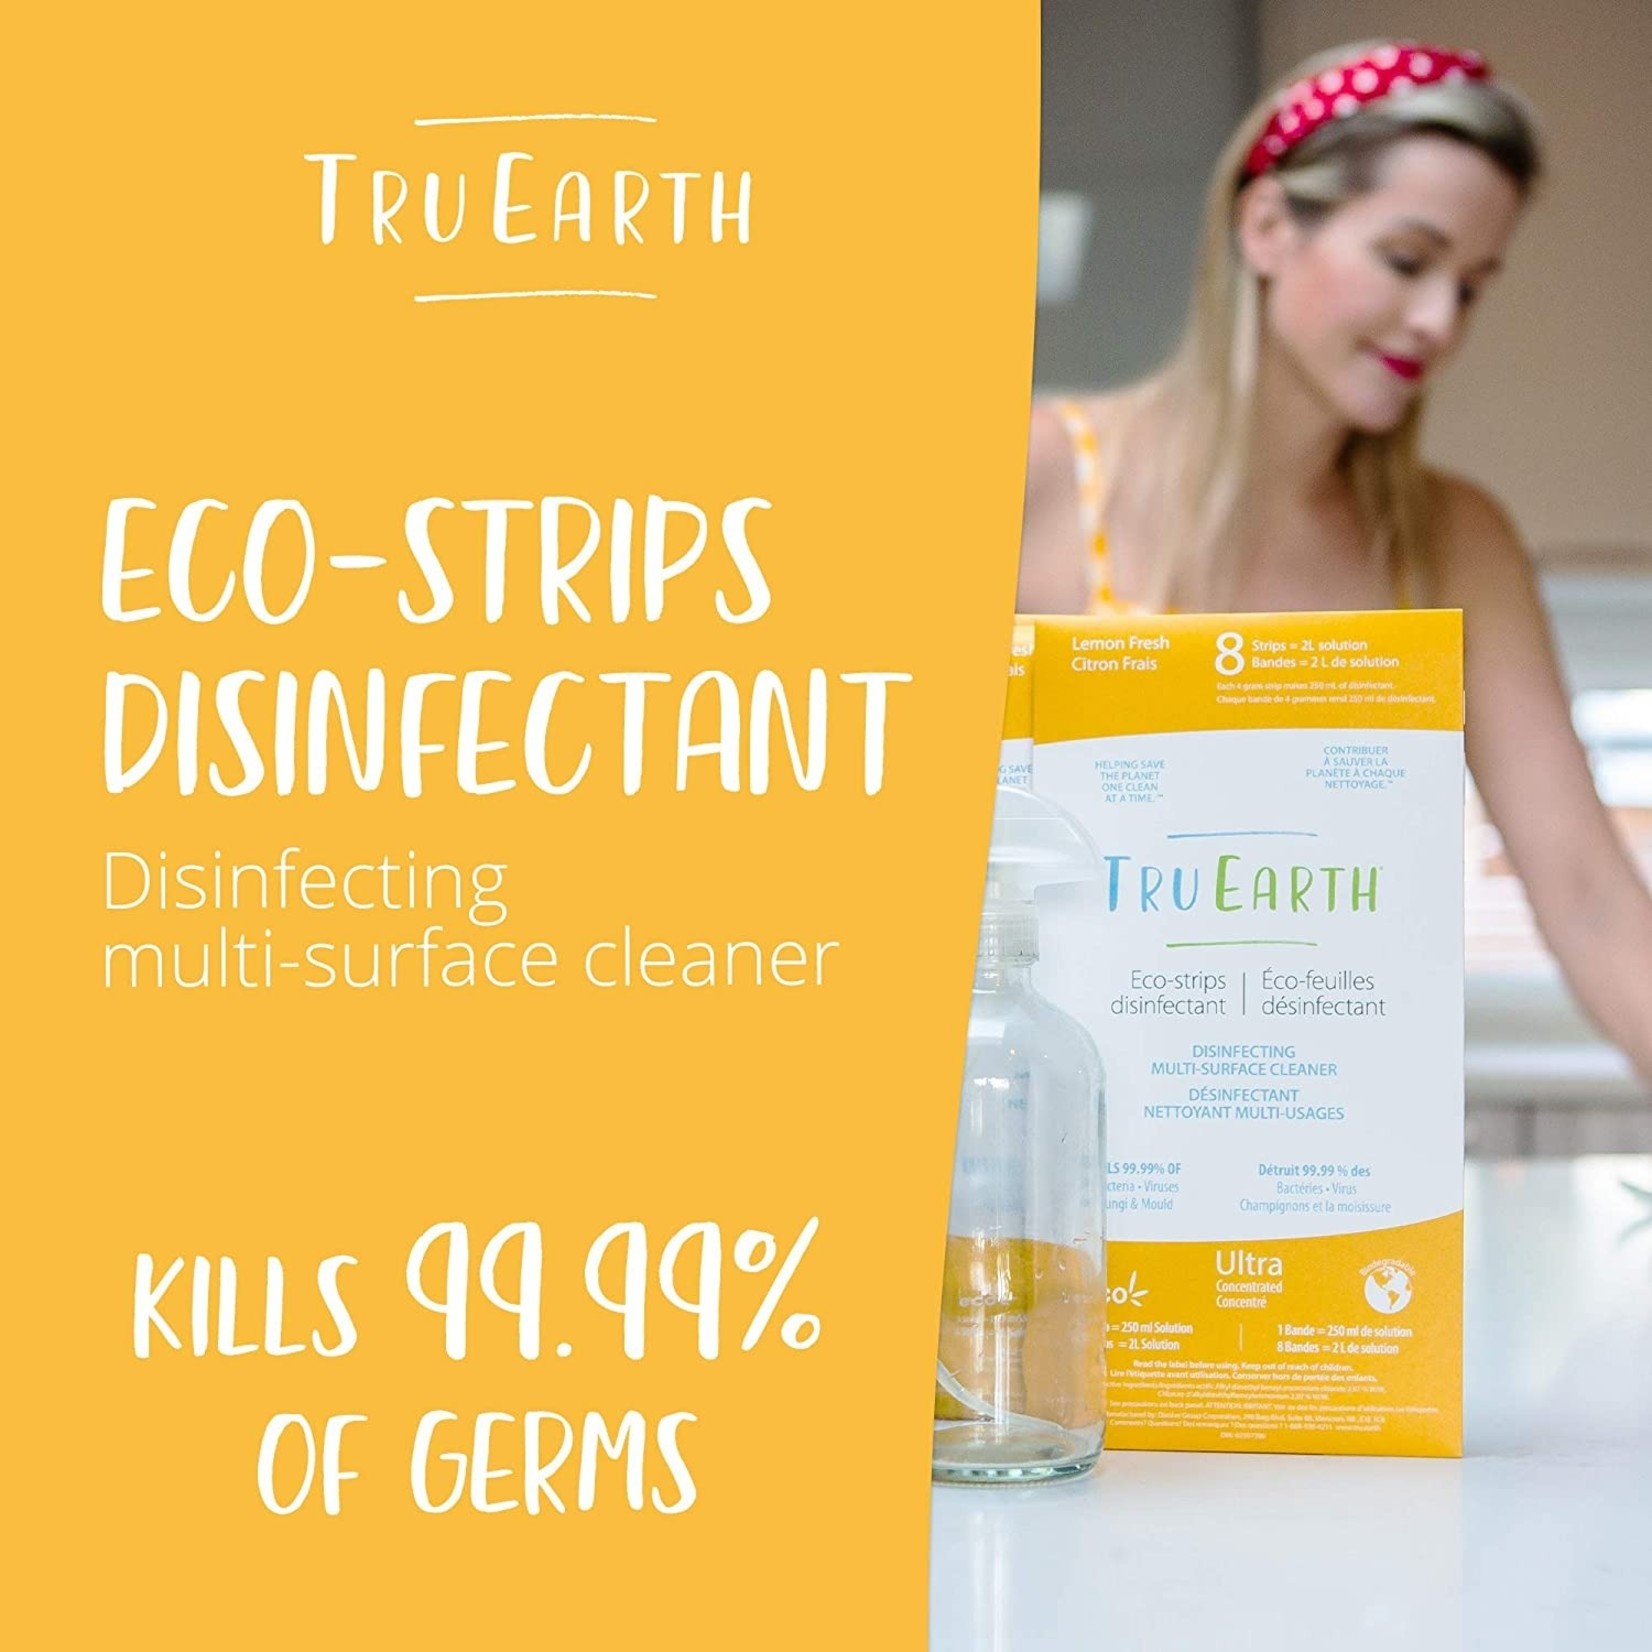 Tru Earth Eco-strips Disinfecting Multi-Surface Cleaner